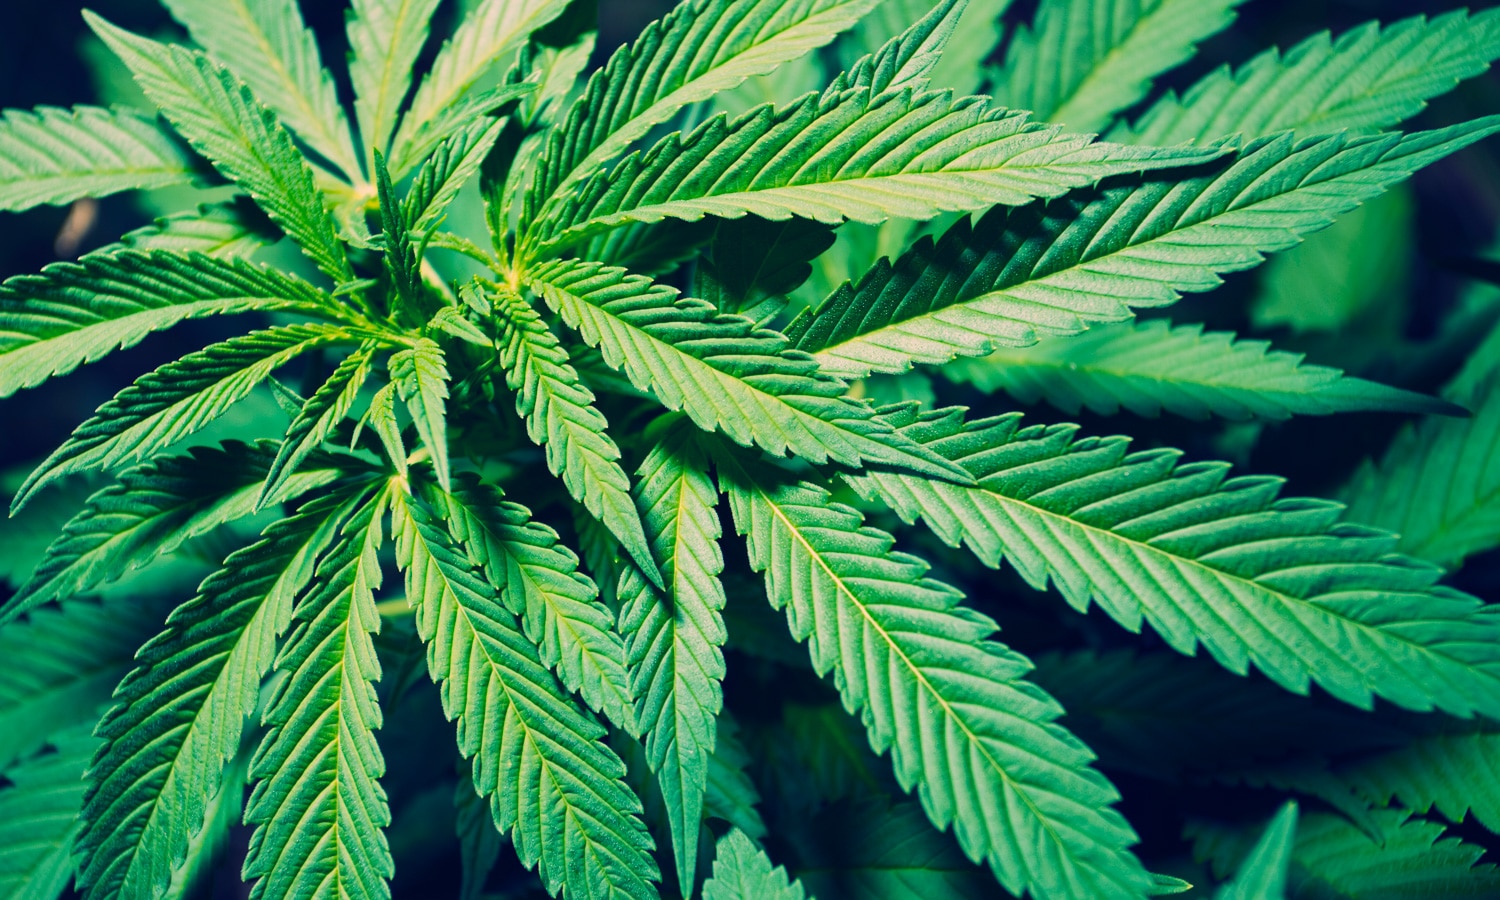 5 Of The Most Promising Cannabinoids For 2020